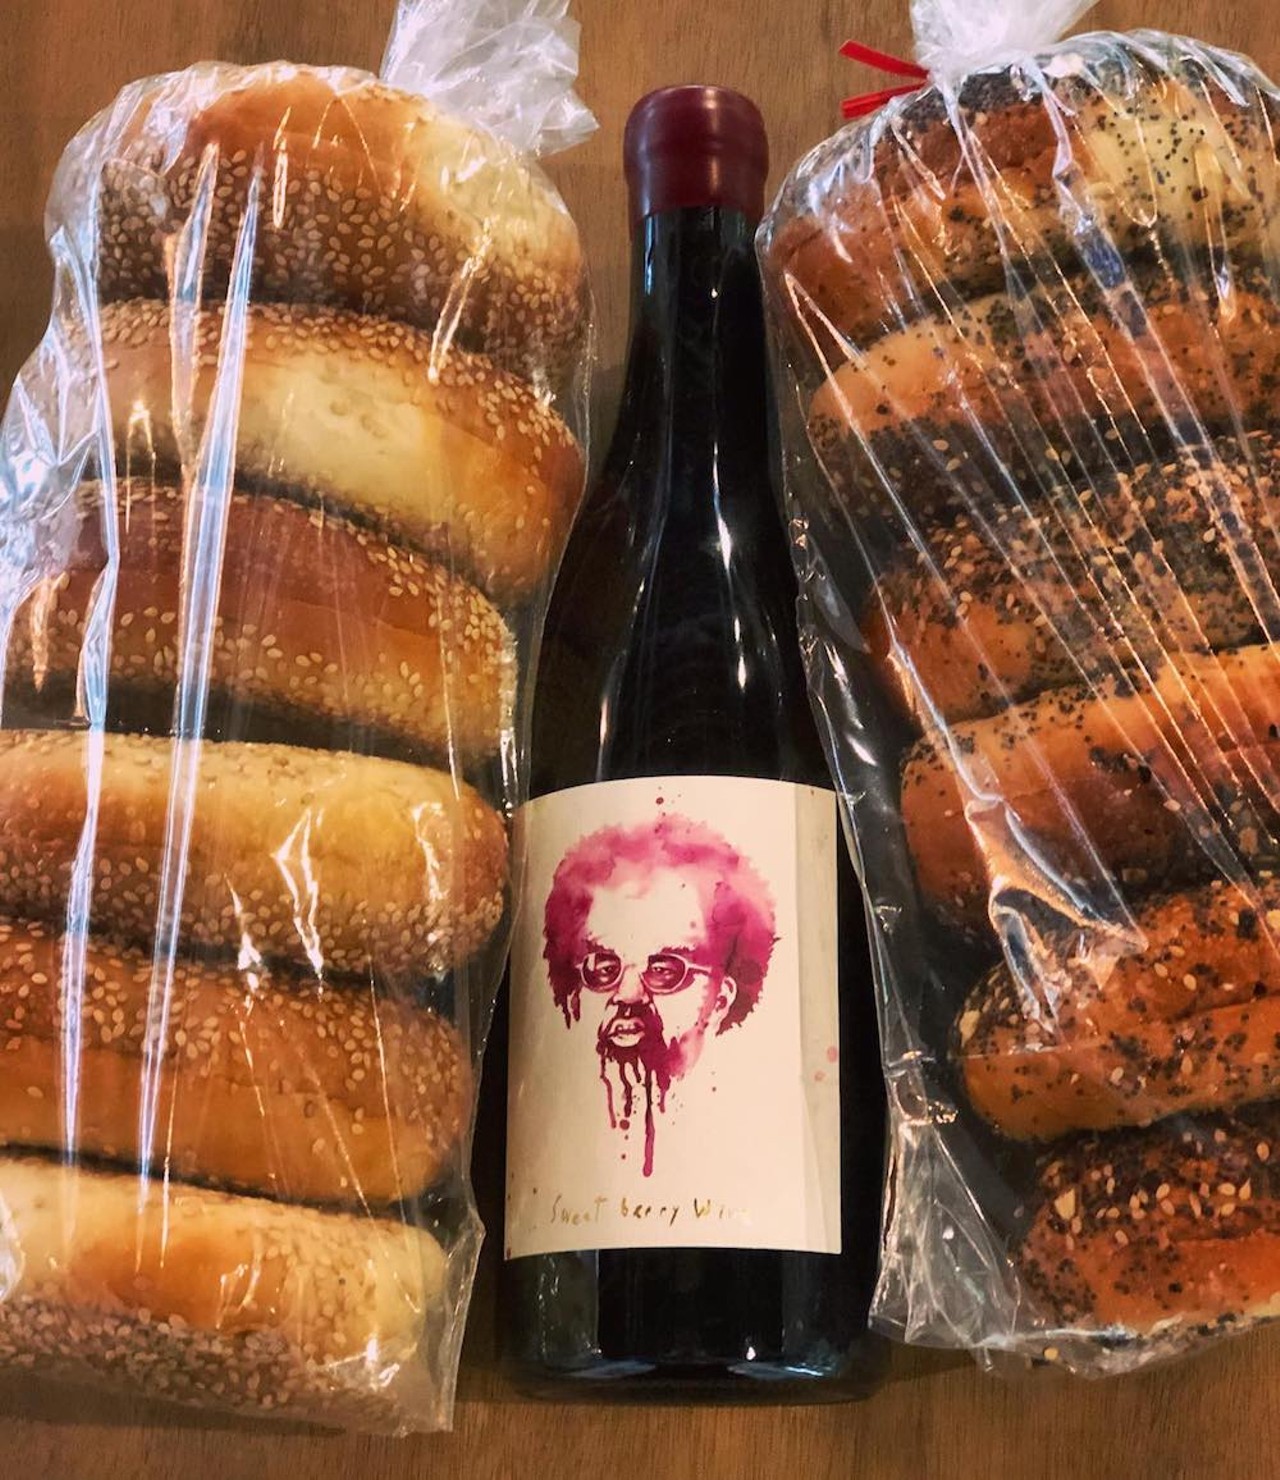 Eola General 
Call 407-723-8496 to order ahead for curbside pickup, including their Bagels + Bottles promotion featuring Swan City Bagels' sesame & everythang, and Curate Orlando's chugworthy sweet berry Las Jaras Wines.
Photo via Eola General/Facebook